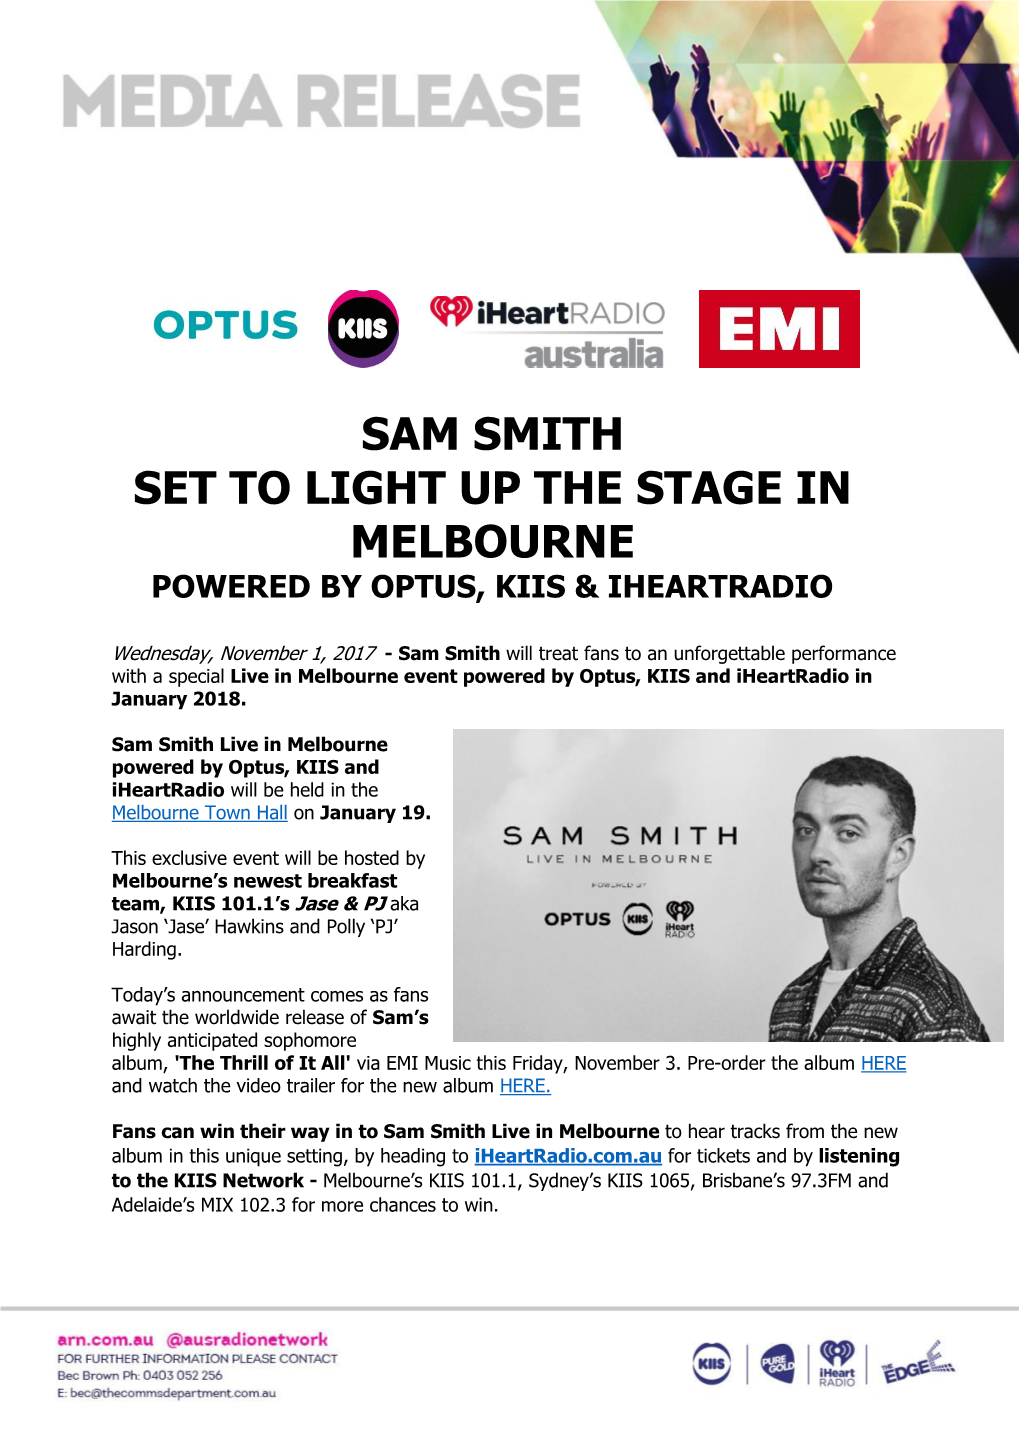 Sam Smith Set to Light up the Stage in Melbourne Powered by Optus, Kiis & Iheartradio